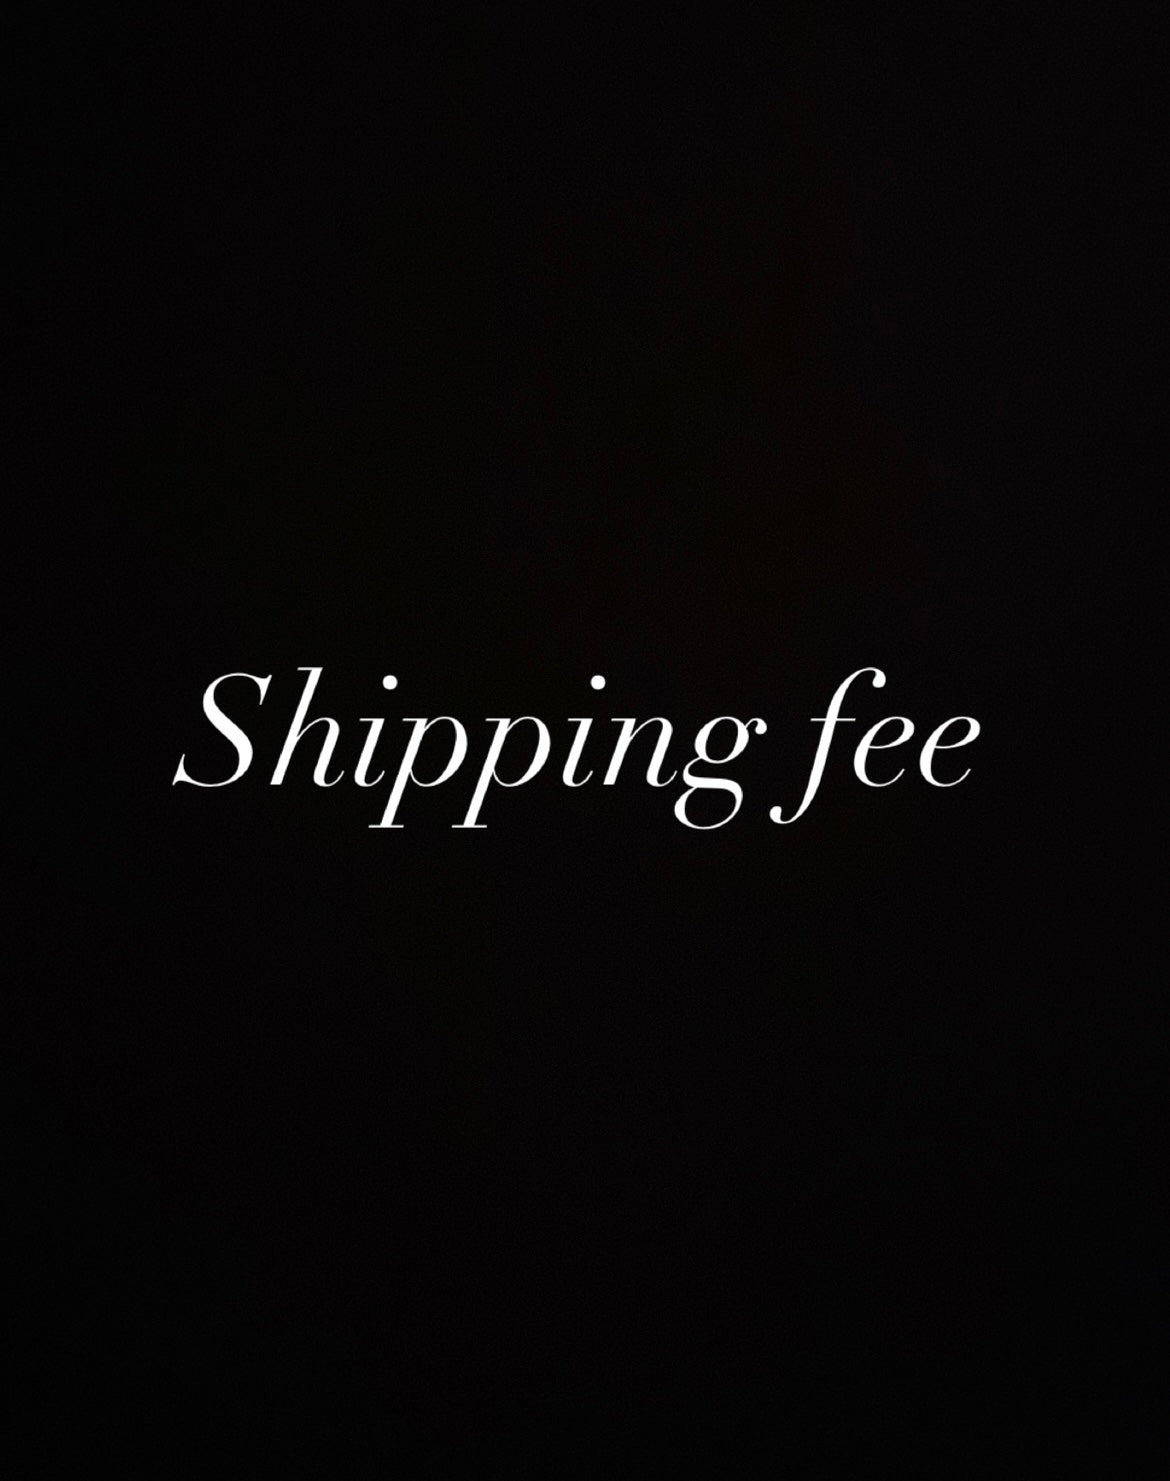 Shipping fee for fabric samples